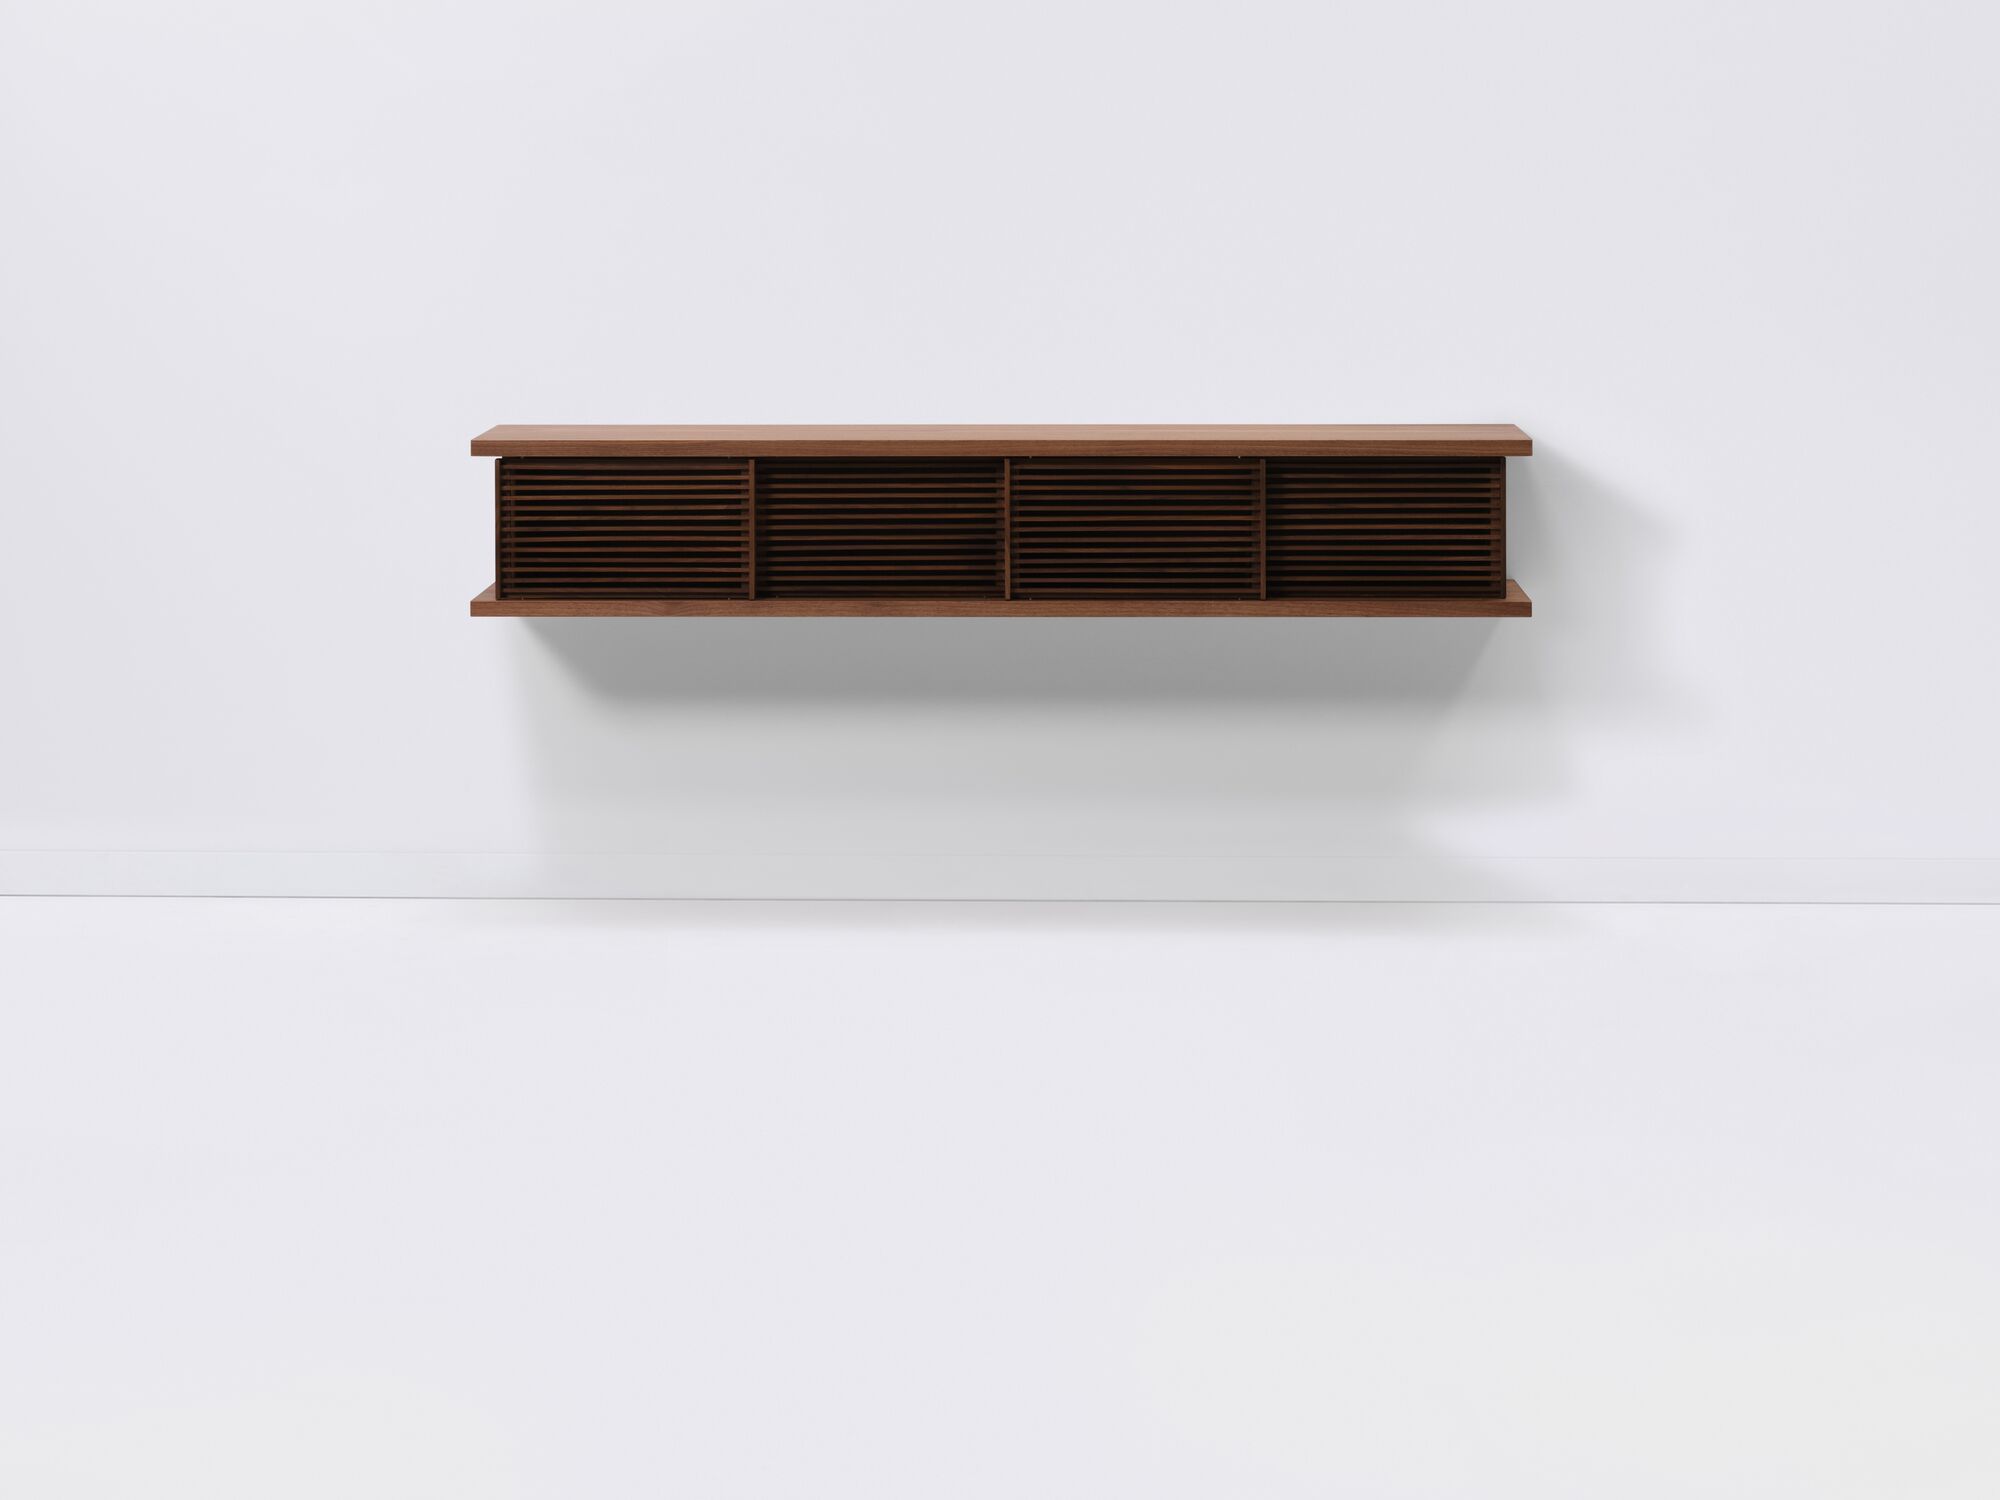 Plank Floating Wall Shelf  Designed by Tom Chung for EQ3